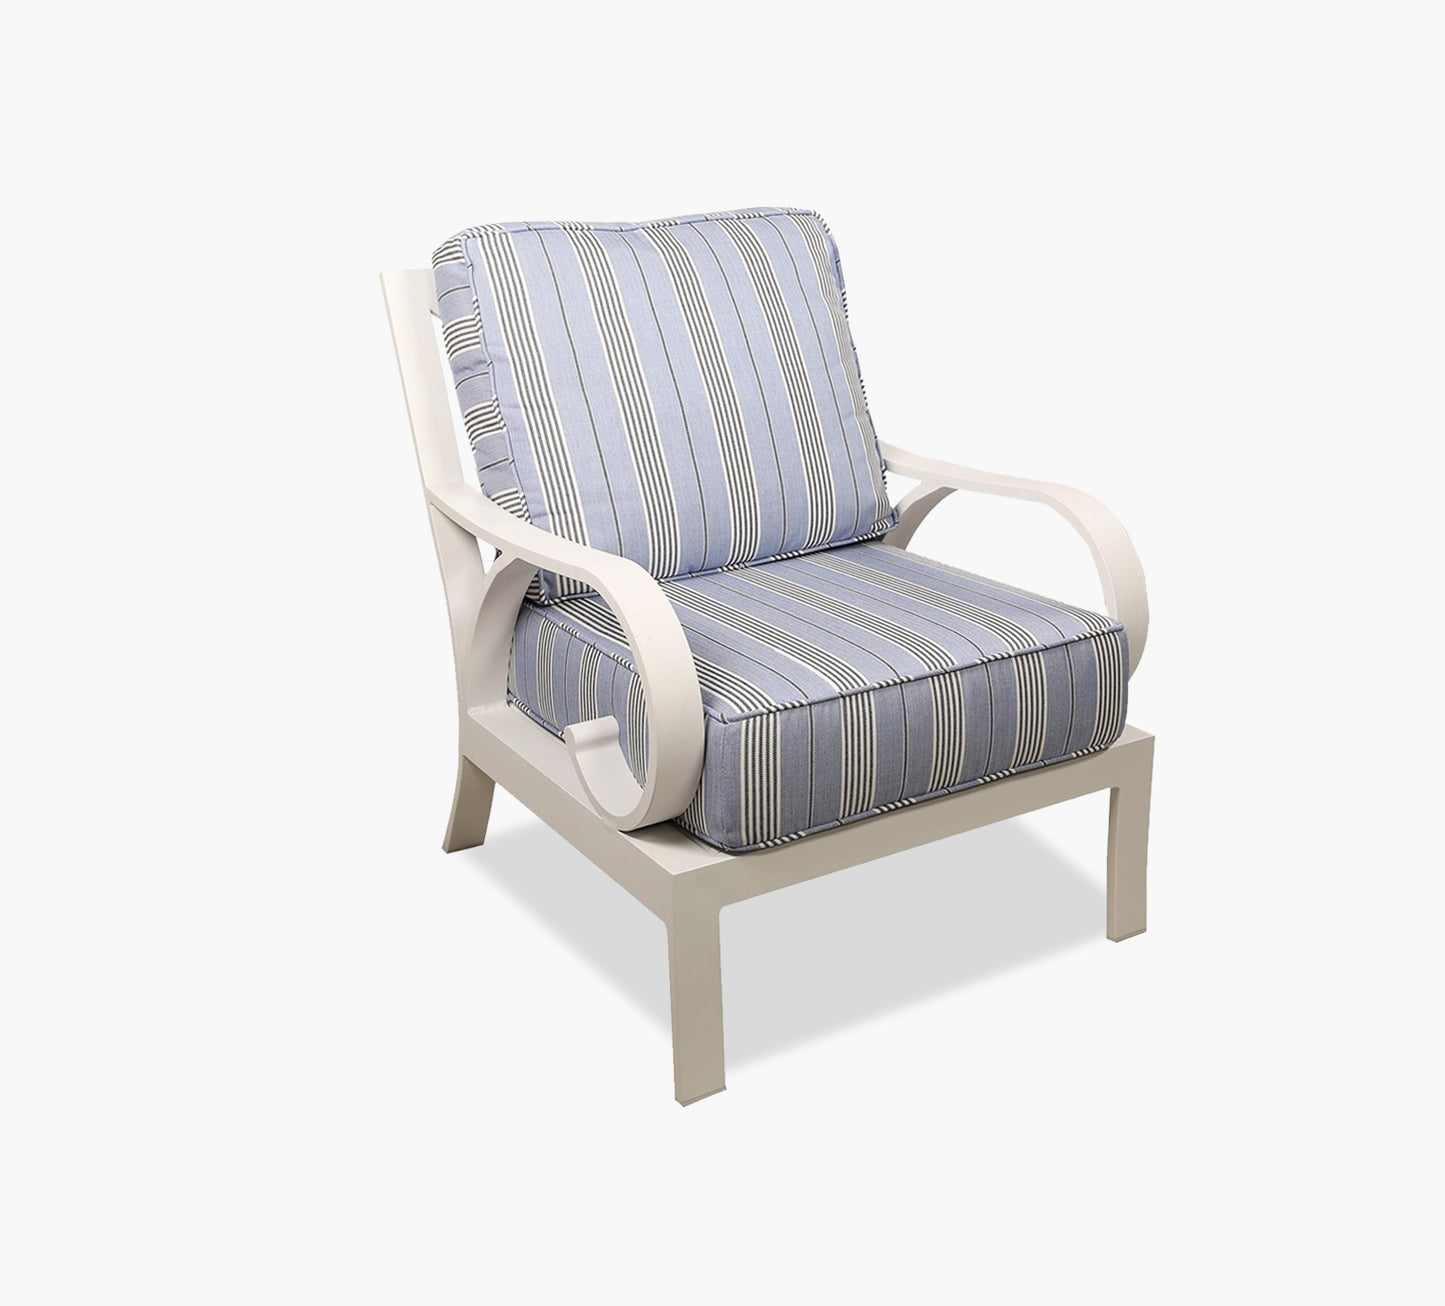 Mariner Outdoor Lounge Chair